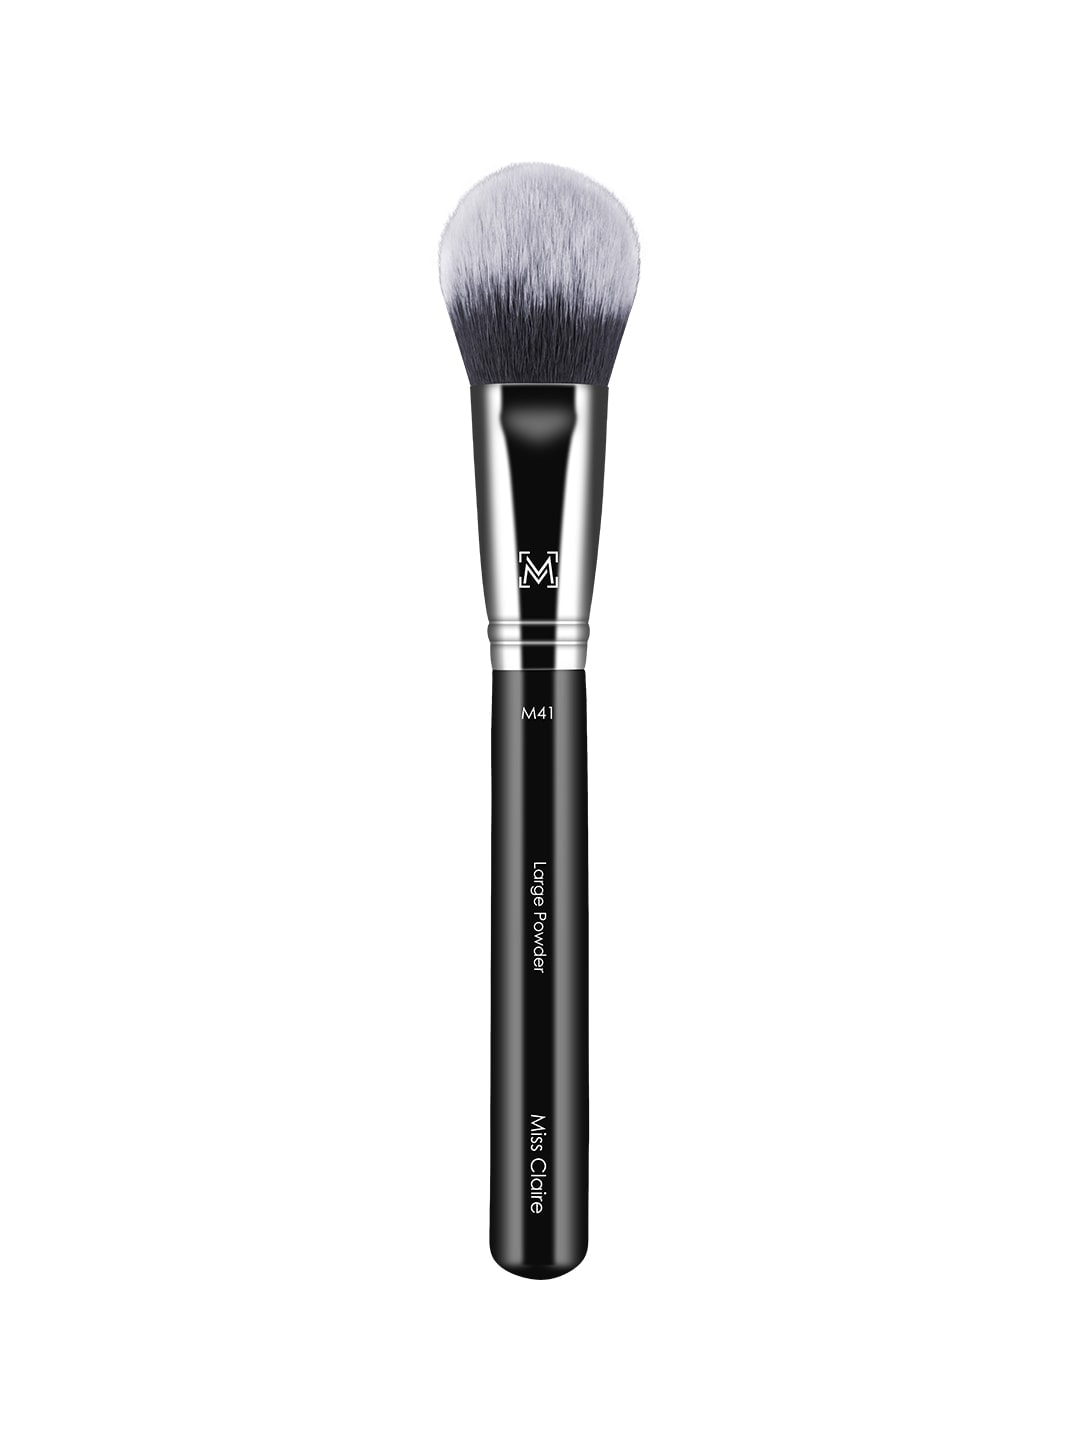 Miss Claire M41 - Large Powder Brush - Silver-Toned & Black Price in India